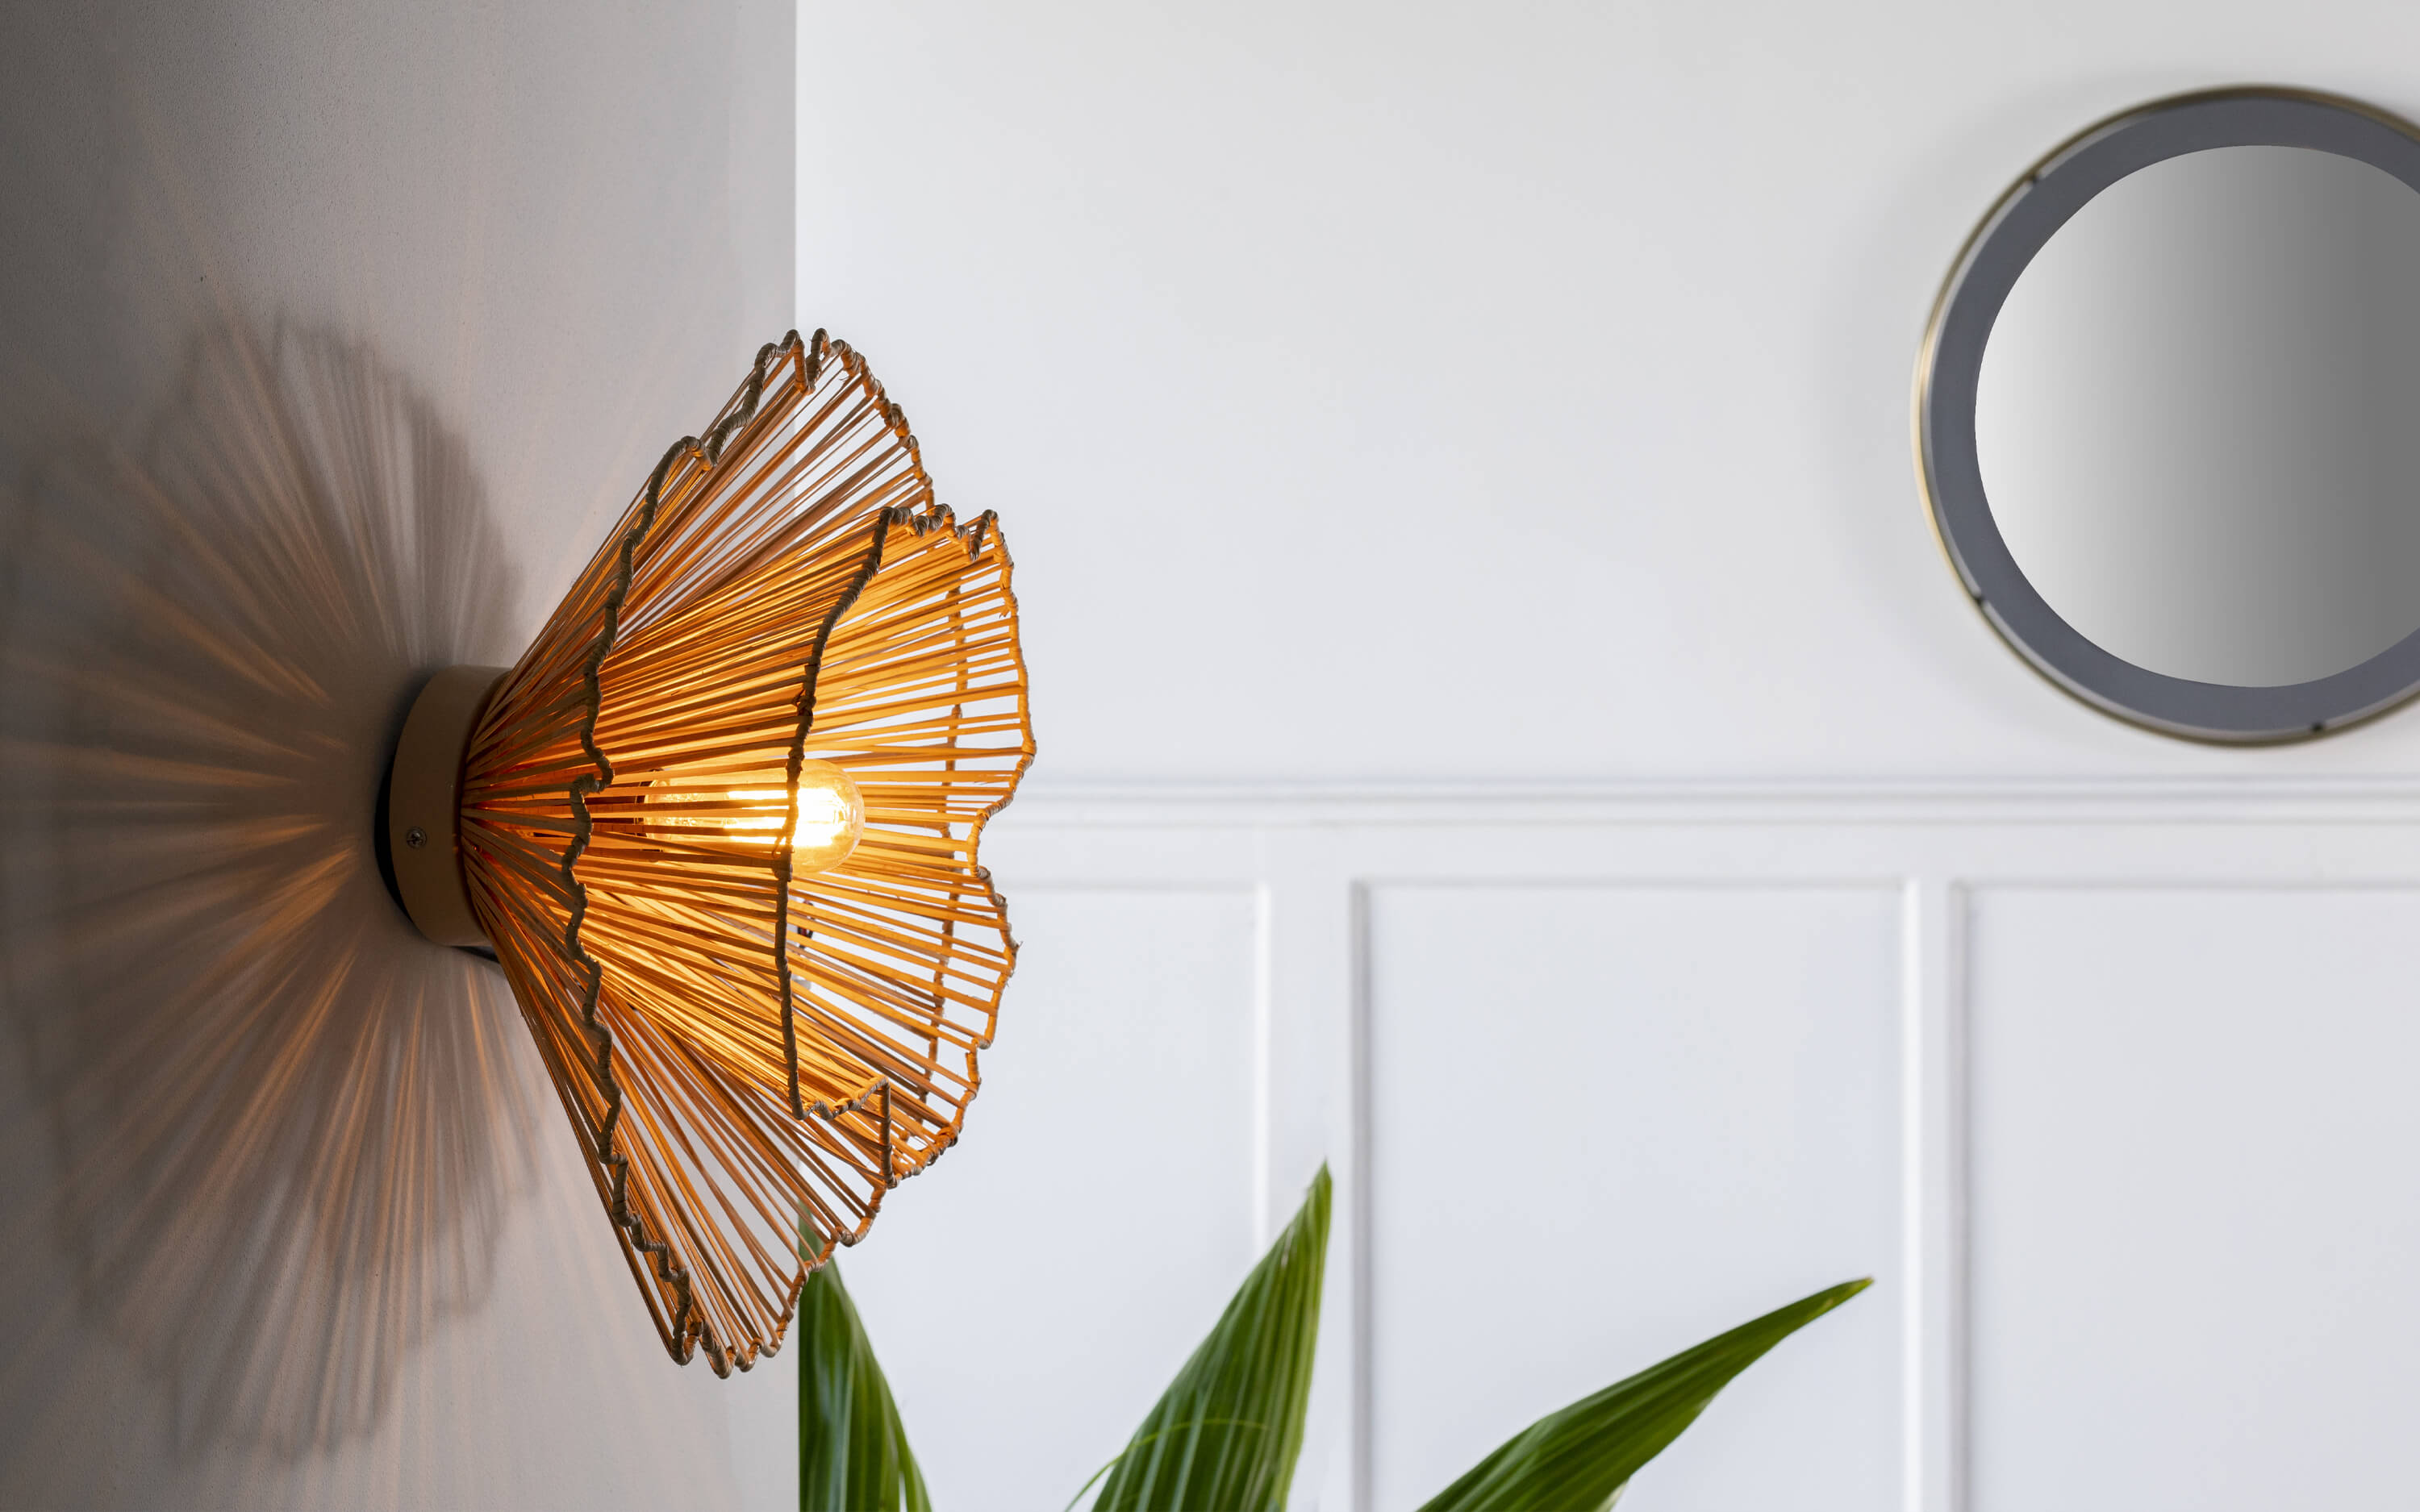 stylish Cane Wall Lamp for the bedroom decor